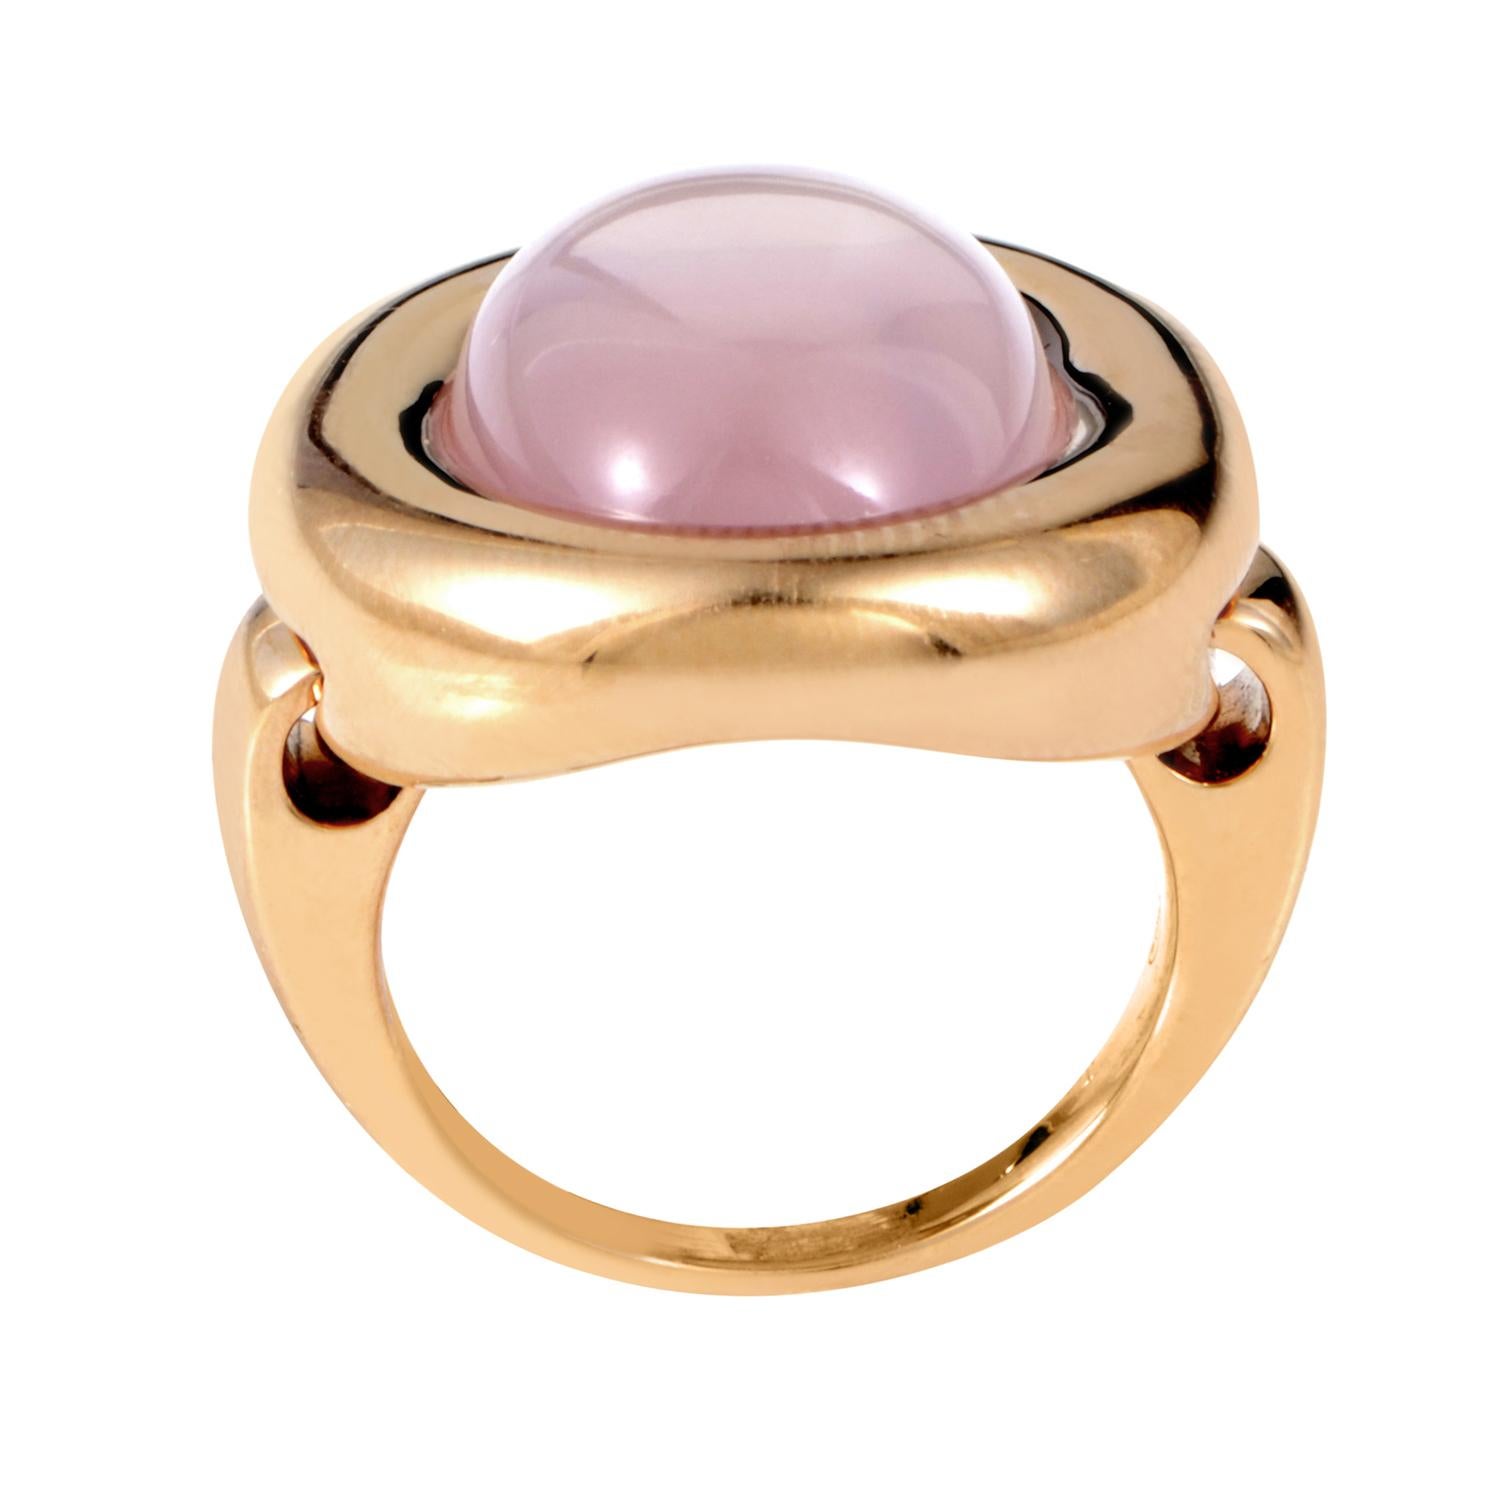 Countering the exuberant gleam of 18K rose gold with its wonderfully mild nuance and lovely appeal, the astonishing pink quartz in this outstanding ring from Poiray weighs 16.00 carats and produces magnificent appeal.
